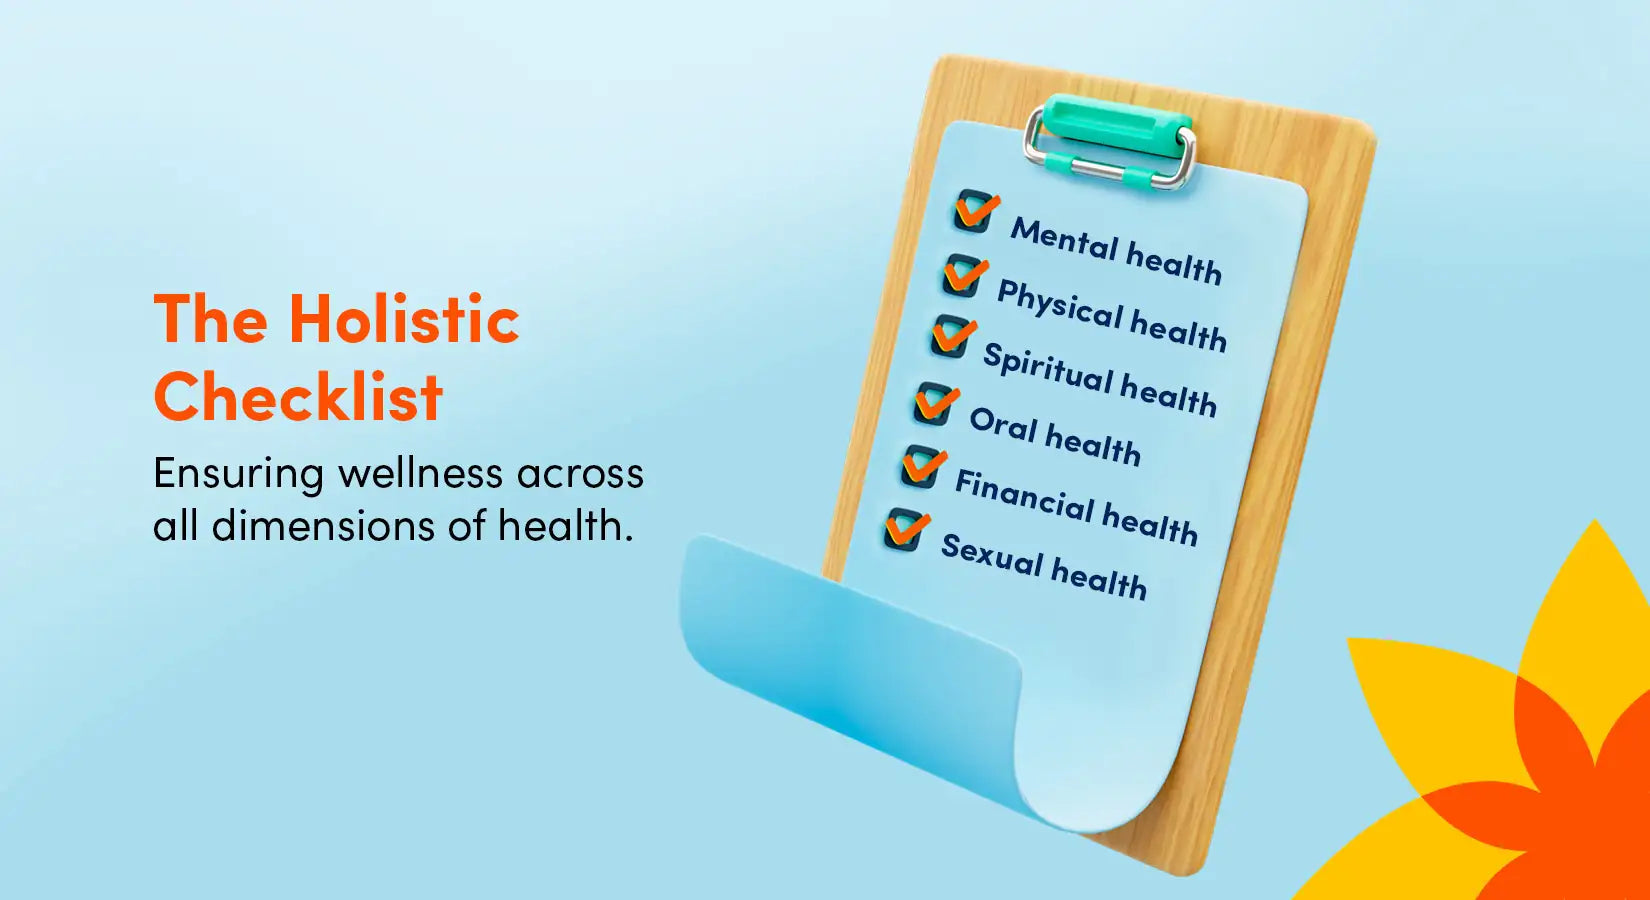 The Holistic Checklist: Ensuring Wellness Across All Dimensions of Health